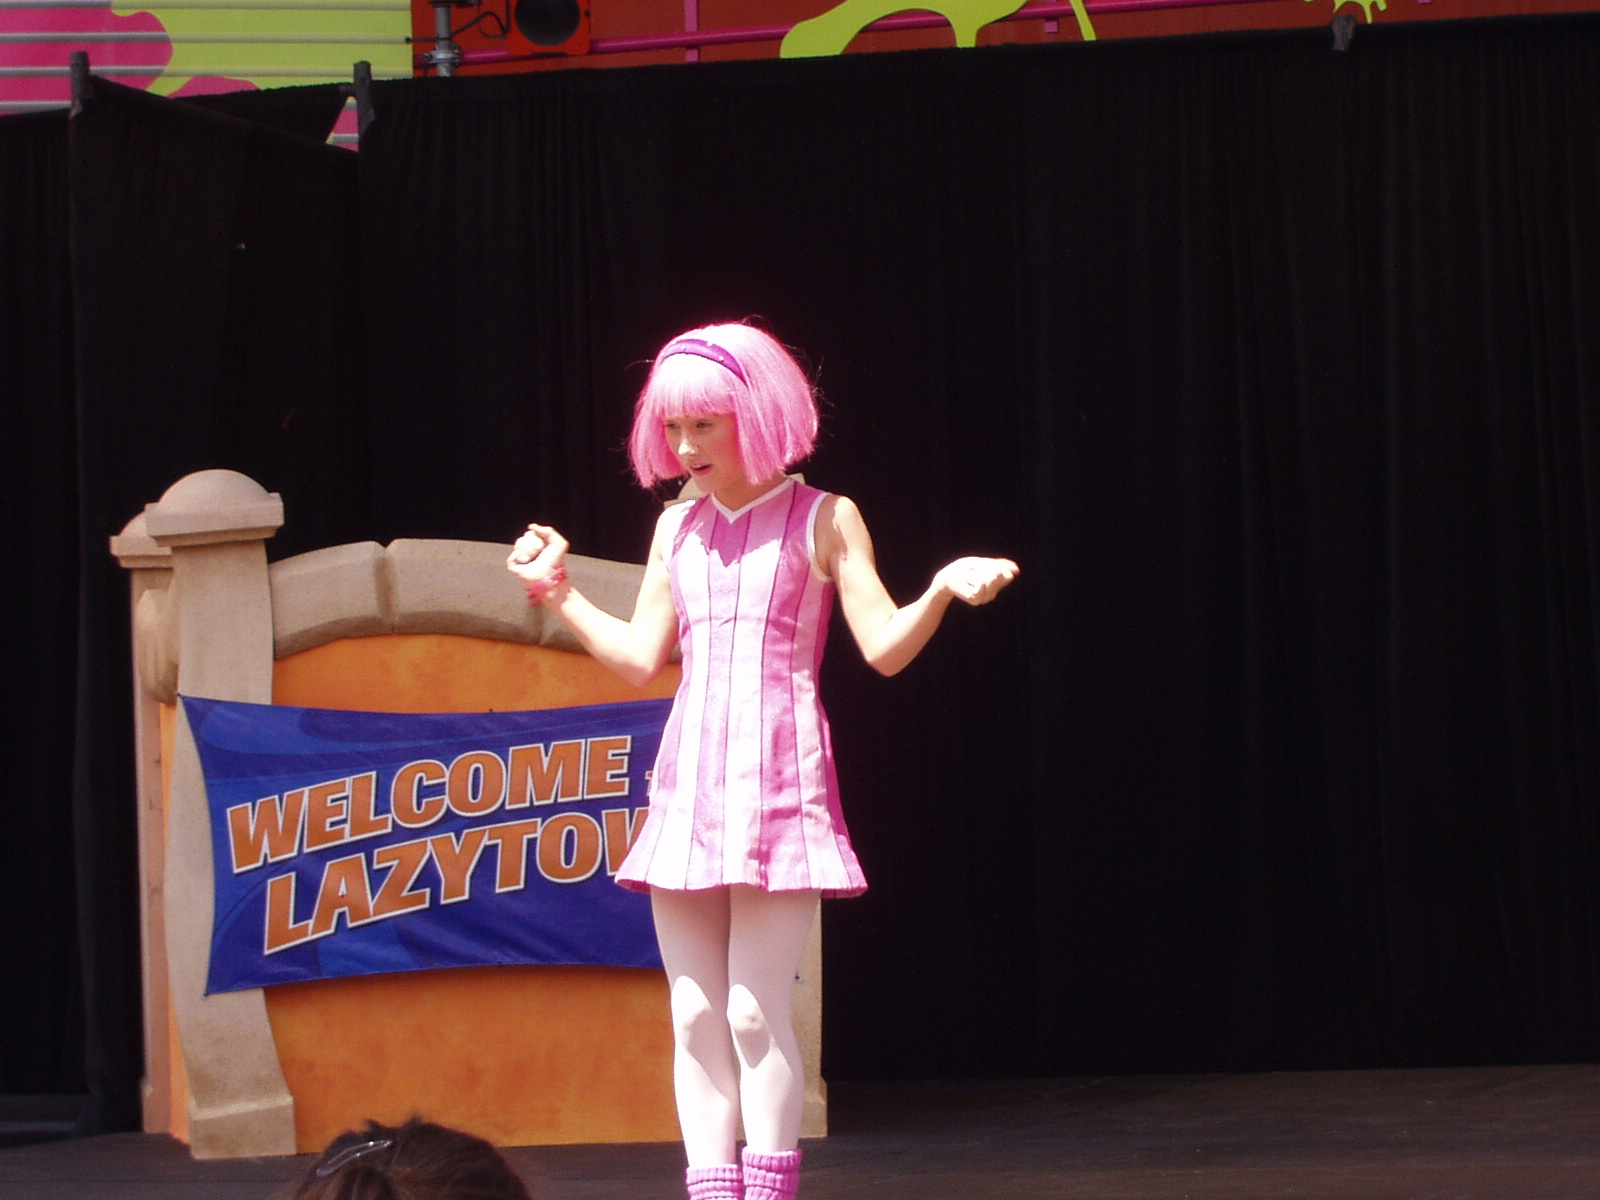 www.lazytown.biz/2011/10/ncircle-signs-up-lazytown-home-entertainment-right...